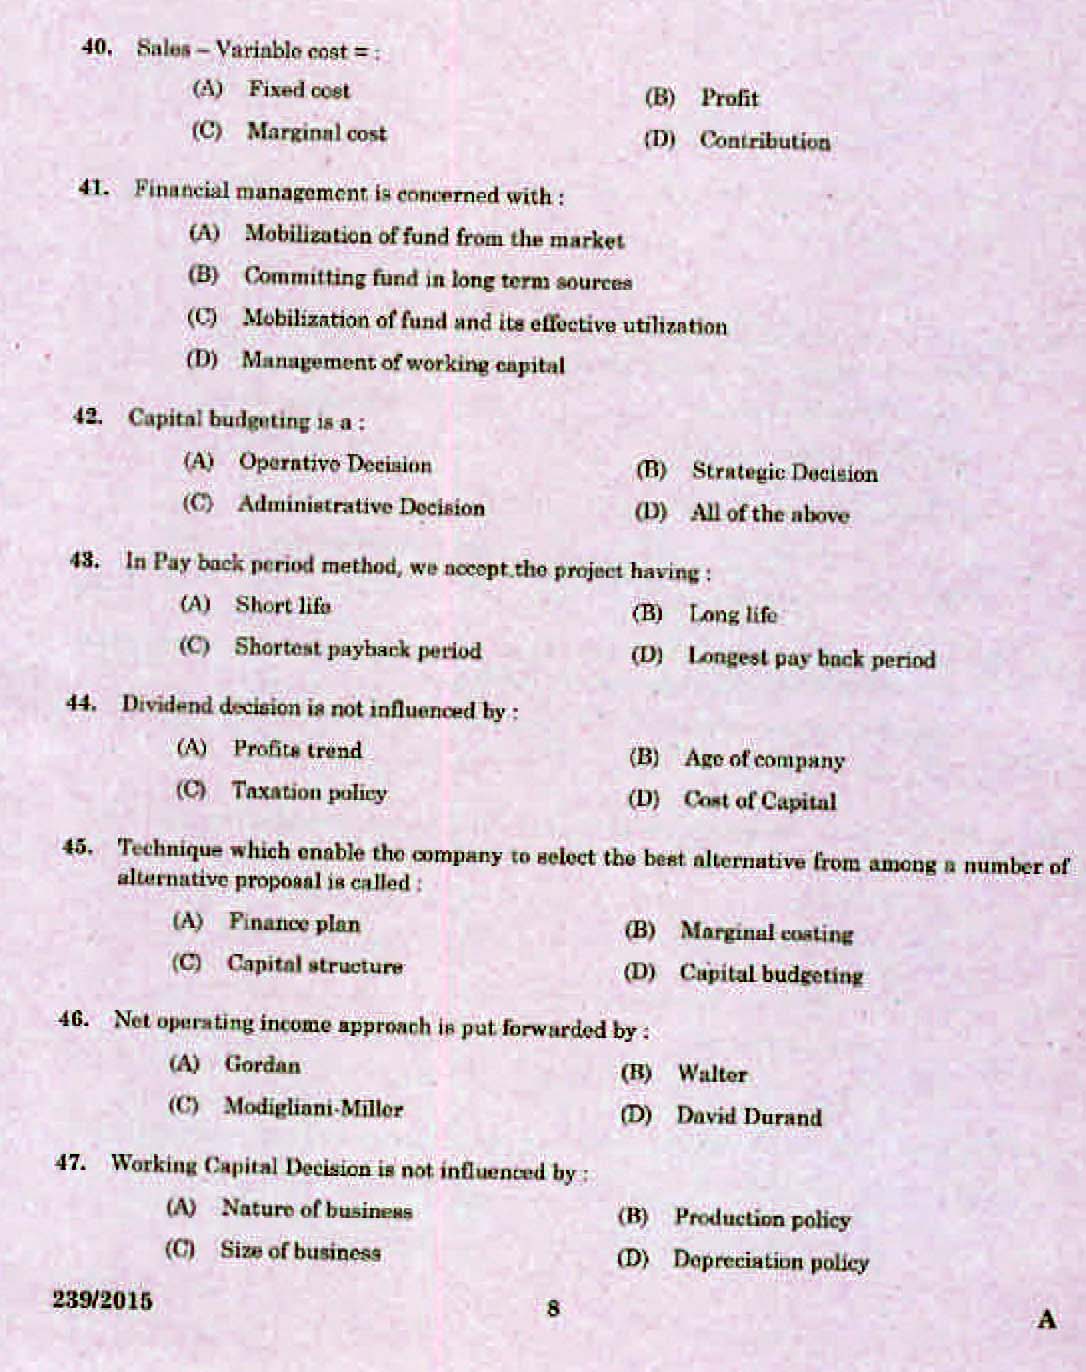 Kerala PSC Accounts Officer OMR Exam 2015 Question Paper Code 2392015 6